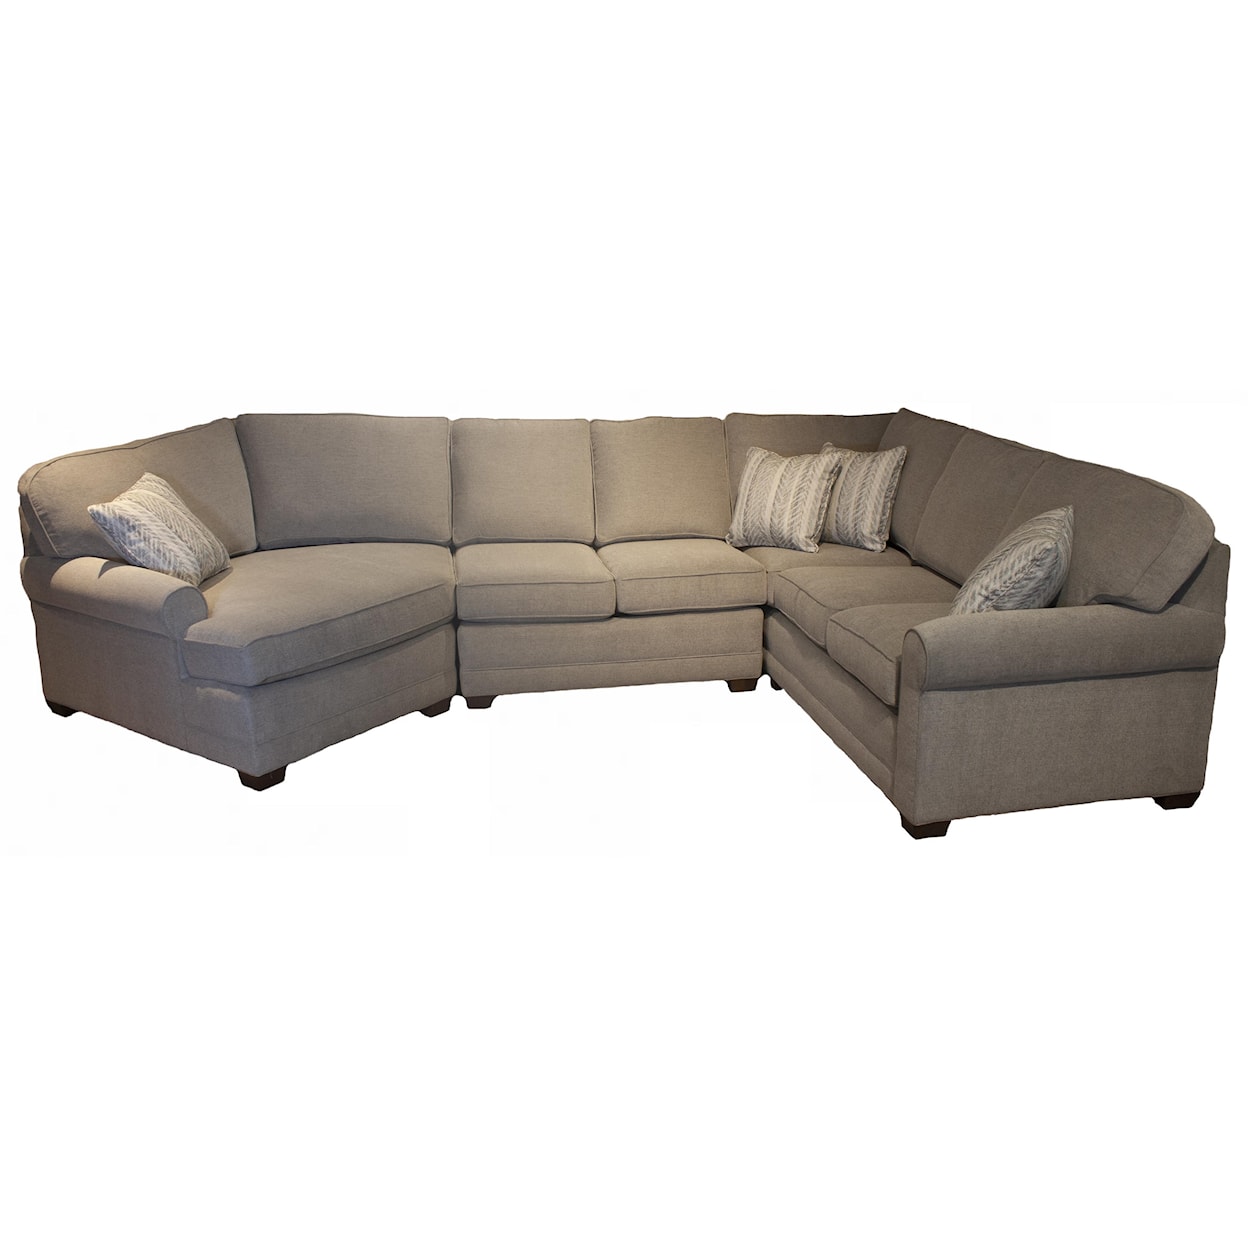 Temple Furniture Tailor Made 3 PC Corner Sectional